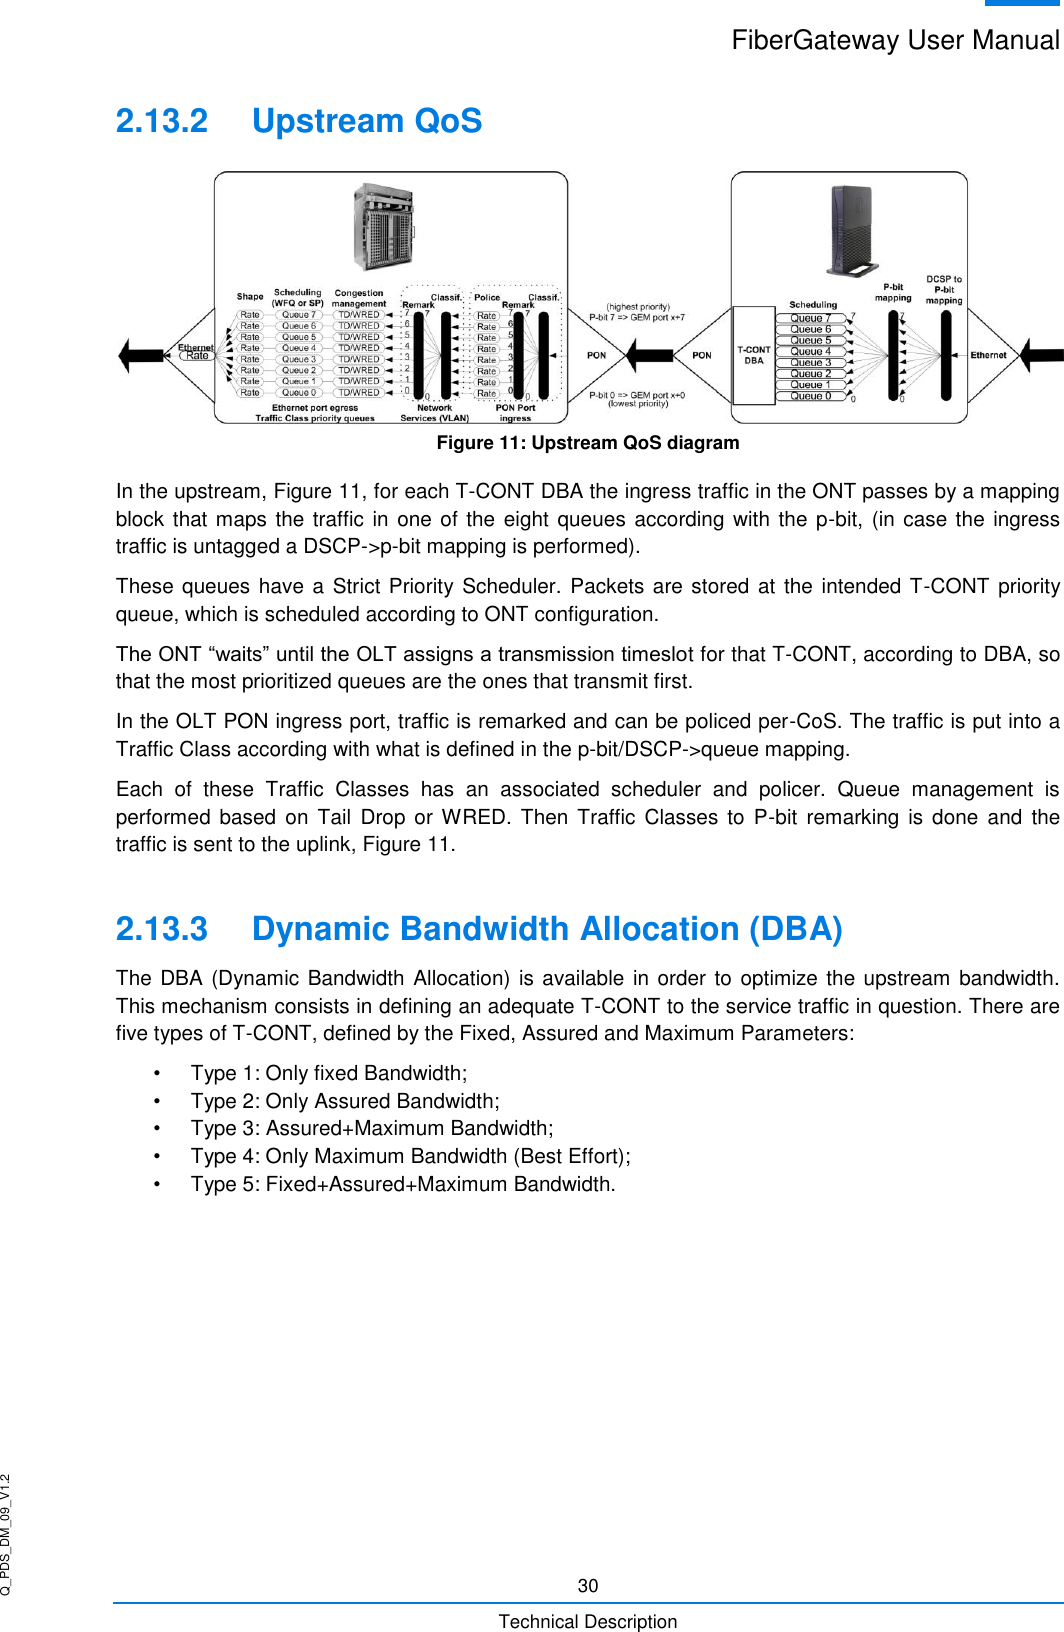 Q_PDS_DM_09_V1.2 FiberGateway User Manual  30 Technical Description 2.13.2  Upstream QoS  Figure 11: Upstream QoS diagram In the upstream, Figure 11, for each T-CONT DBA the ingress traffic in the ONT passes by a mapping block that maps the traffic in one of  the eight queues according with the p-bit, (in case the  ingress traffic is untagged a DSCP-&gt;p-bit mapping is performed). These queues have a Strict Priority Scheduler. Packets are stored at  the intended T-CONT priority queue, which is scheduled according to ONT configuration. The ONT “waits” until the OLT assigns a transmission timeslot for that T-CONT, according to DBA, so that the most prioritized queues are the ones that transmit first. In the OLT PON ingress port, traffic is remarked and can be policed per-CoS. The traffic is put into a Traffic Class according with what is defined in the p-bit/DSCP-&gt;queue mapping. Each  of  these  Traffic  Classes  has  an  associated  scheduler  and  policer.  Queue  management  is performed  based  on  Tail  Drop  or  WRED.  Then  Traffic  Classes to P-bit  remarking is done  and  the traffic is sent to the uplink, Figure 11. 2.13.3  Dynamic Bandwidth Allocation (DBA) The DBA (Dynamic Bandwidth Allocation) is available in order to  optimize the upstream bandwidth. This mechanism consists in defining an adequate T-CONT to the service traffic in question. There are five types of T-CONT, defined by the Fixed, Assured and Maximum Parameters: •  Type 1: Only fixed Bandwidth; •  Type 2: Only Assured Bandwidth; •  Type 3: Assured+Maximum Bandwidth; •  Type 4: Only Maximum Bandwidth (Best Effort); •  Type 5: Fixed+Assured+Maximum Bandwidth. 